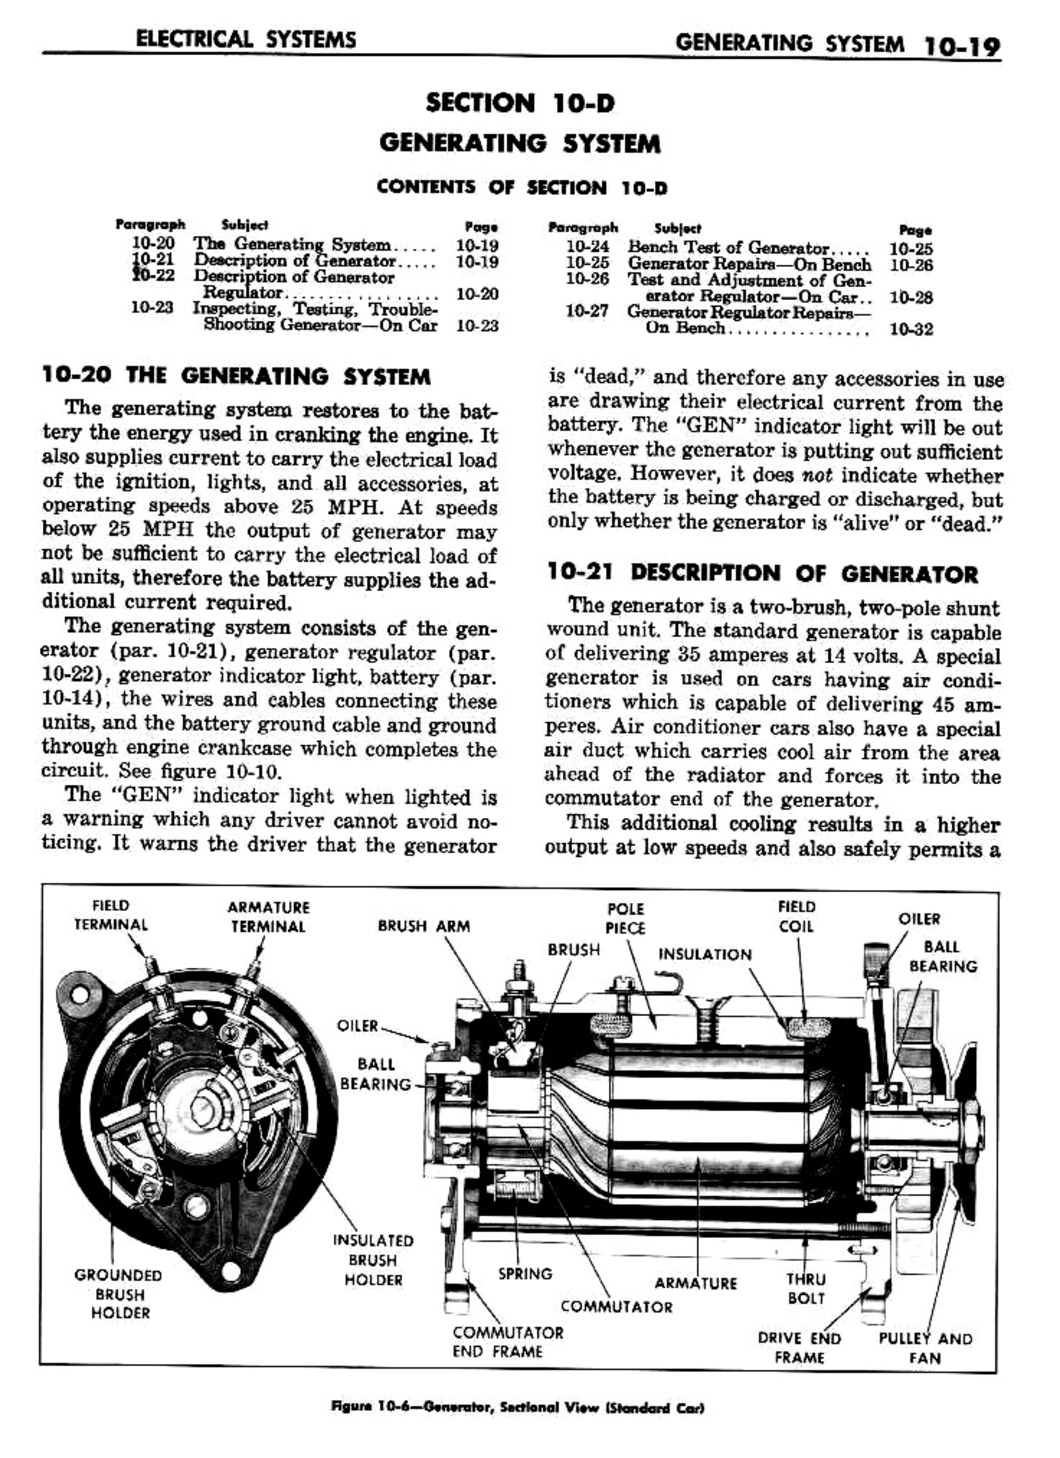 n_11 1960 Buick Shop Manual - Electrical Systems-019-019.jpg